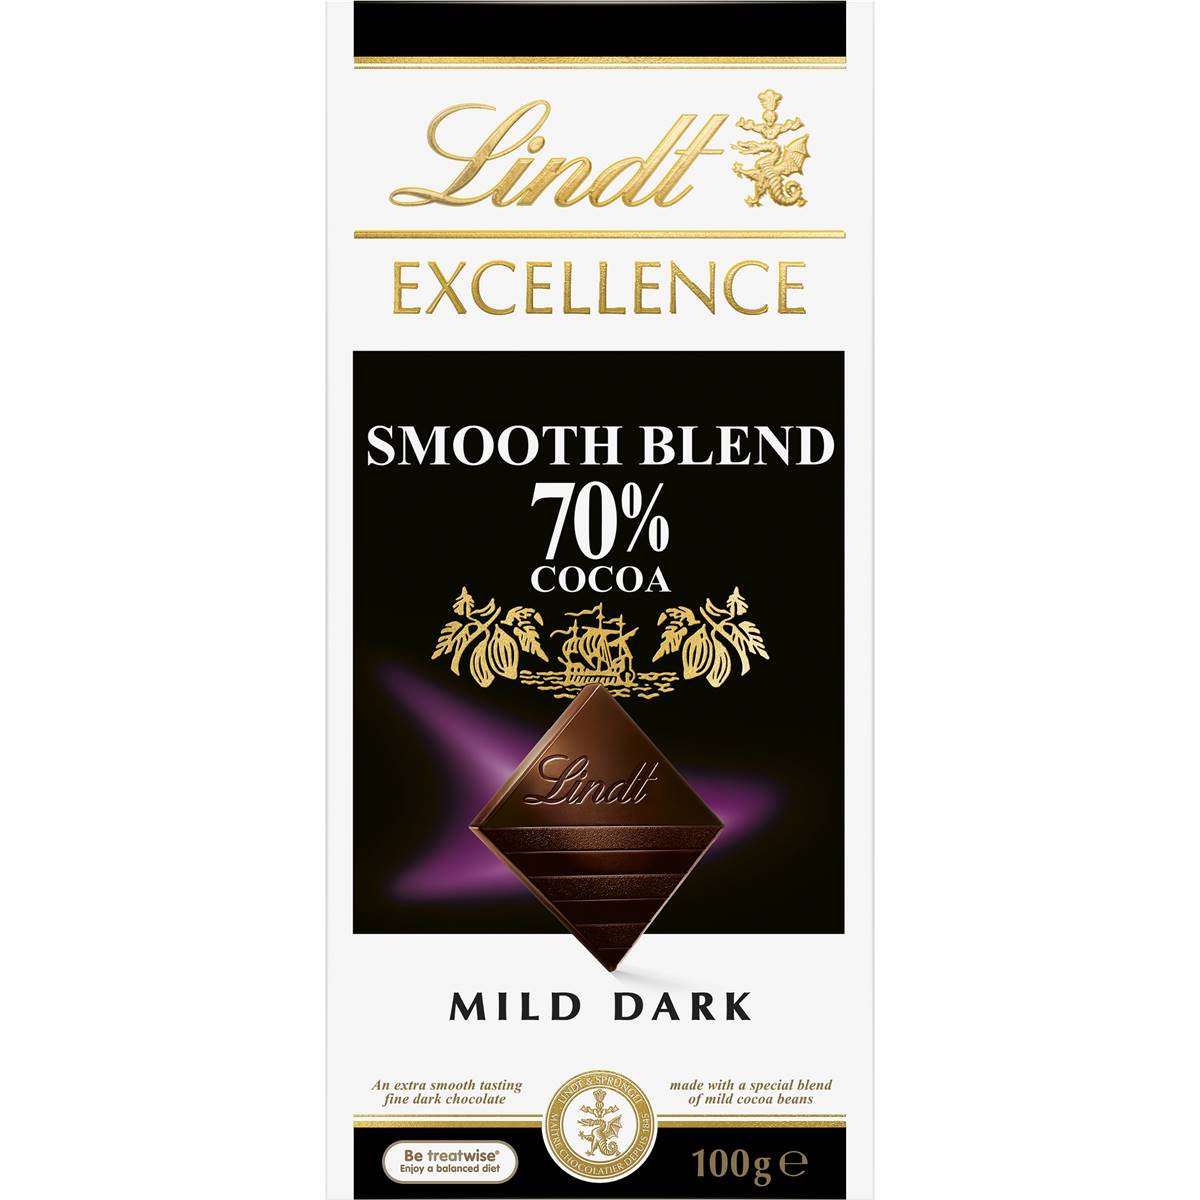 Calories in Lindt Excellence Dark Chocolate 70% Smooth Blend Cocoa Block